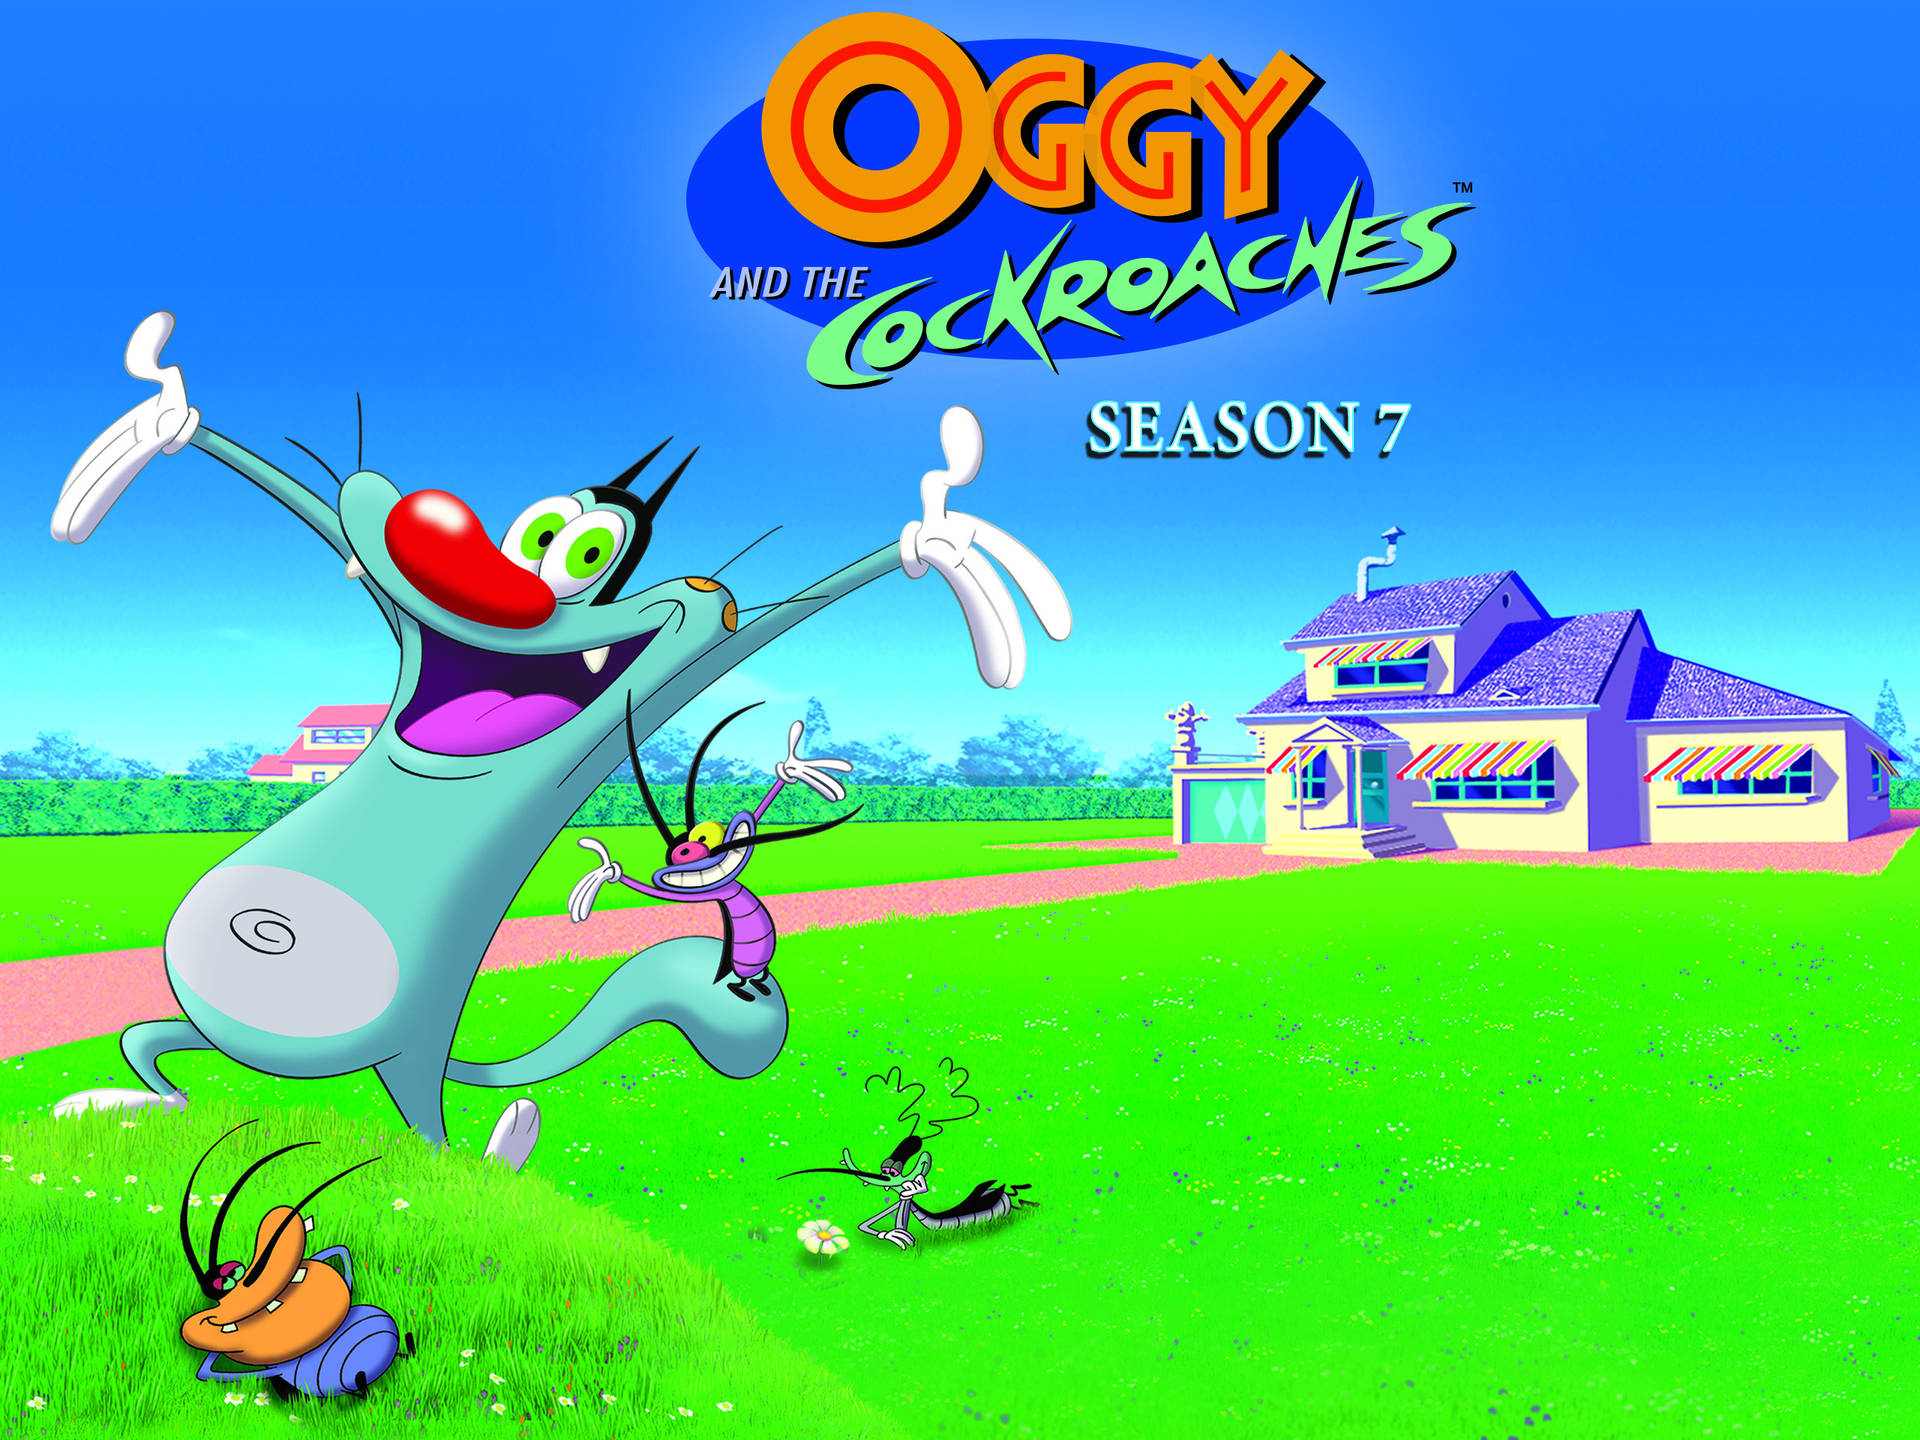 Download Oggy And The Cockroaches Season 7 Wallpaper 